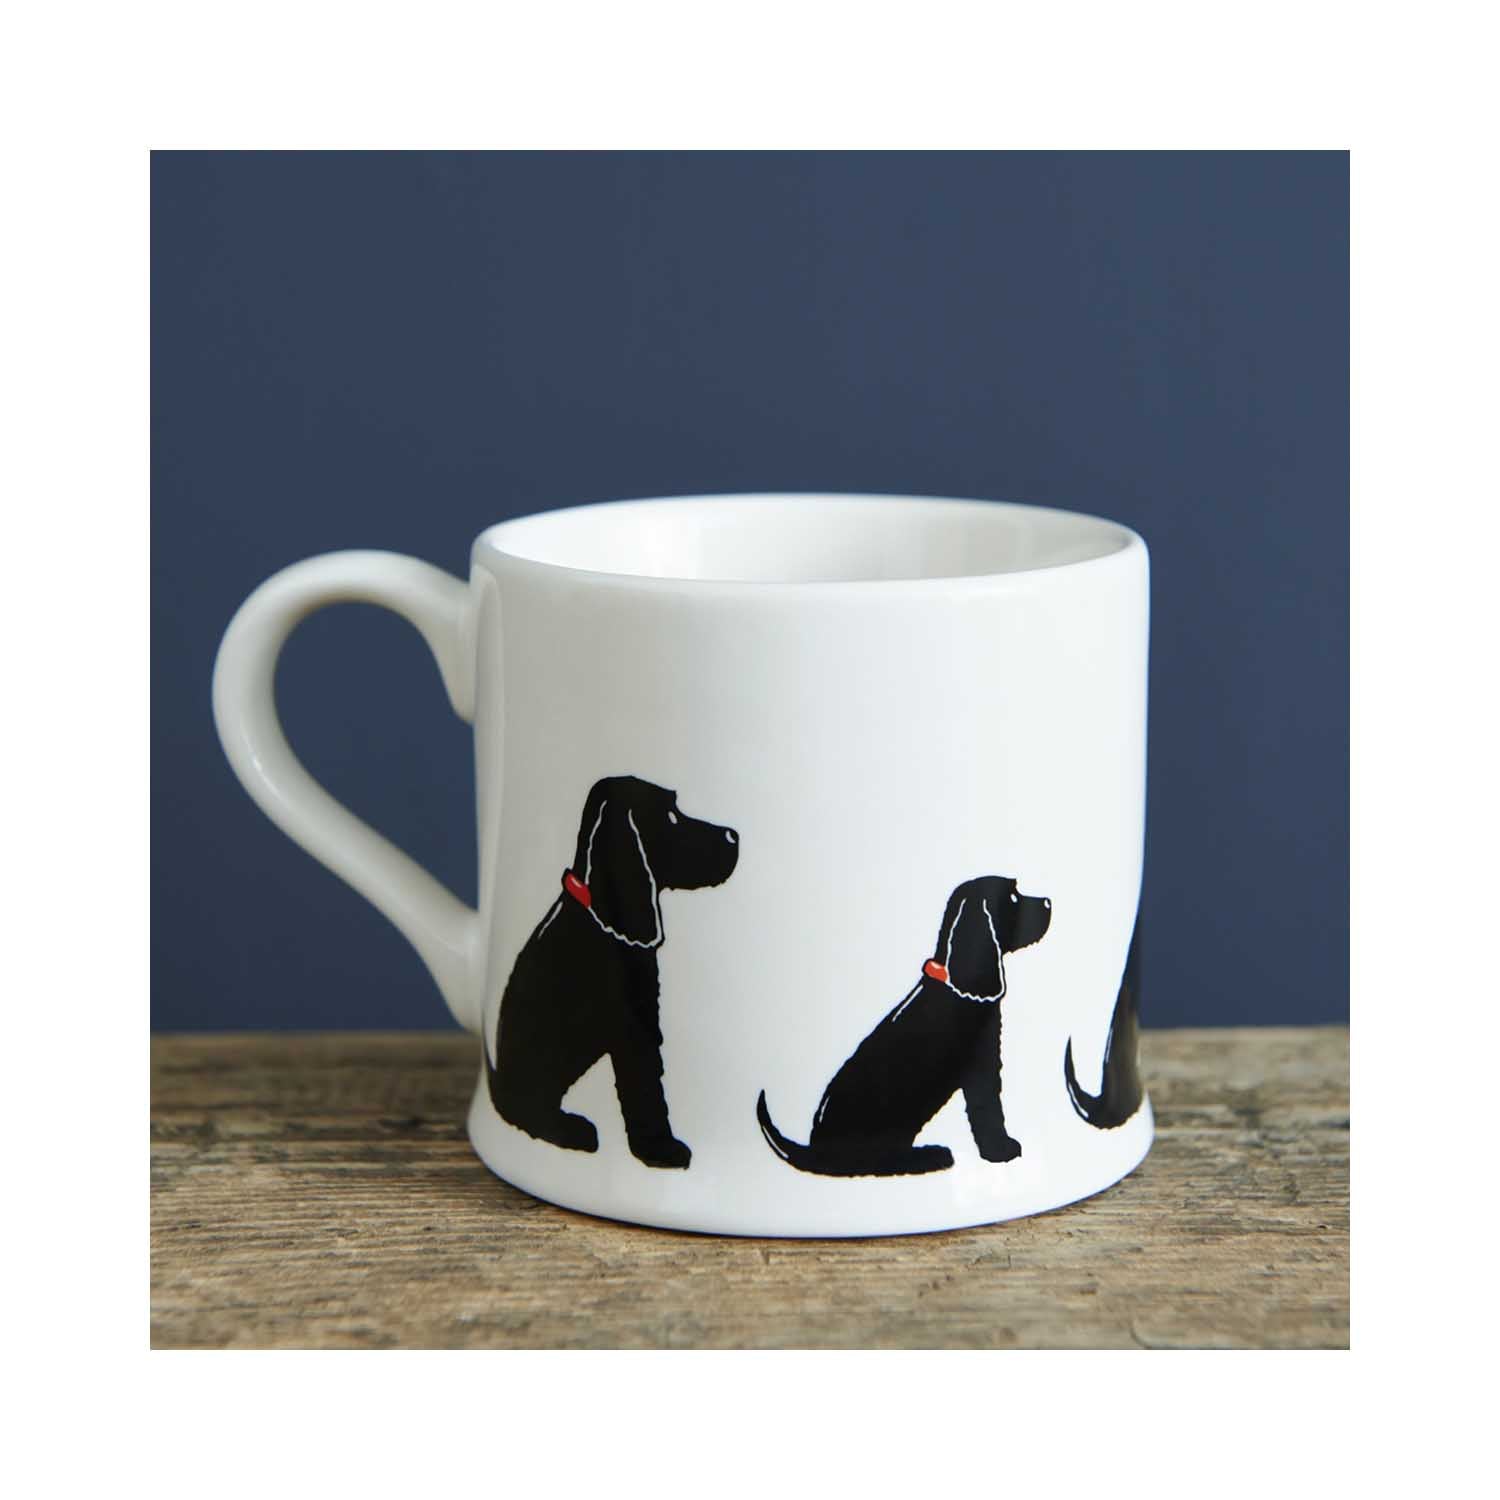 Dog Lover Gifts available at Dog Krazy Gifts - Hugo the Black Cocker Spaniel Mug - part of the Sweet William range available from www.DogKrazyGifts.co.uk